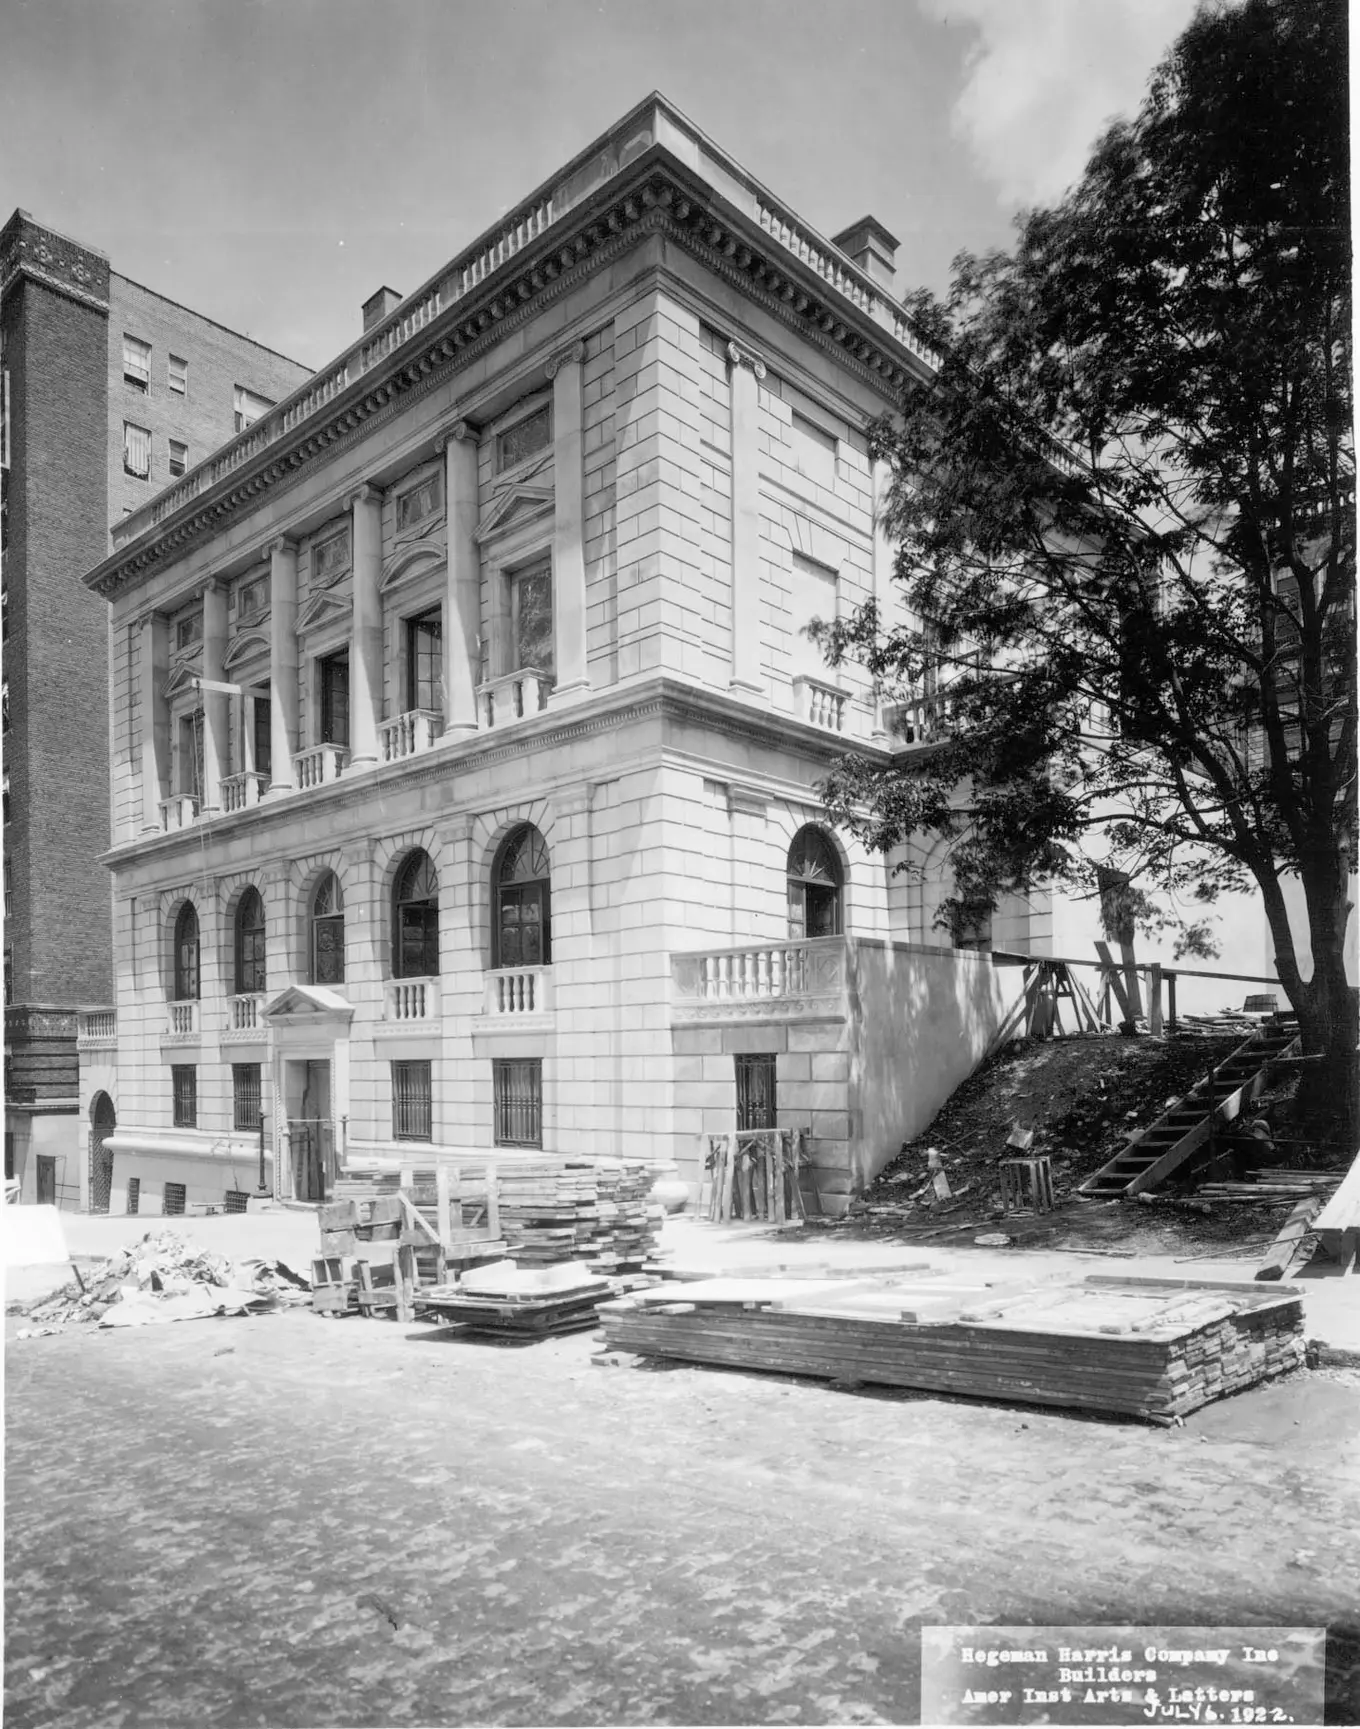 A black and white photograph of the exterior of the American Academy of Arts and Letters. In front of the building, building materials sit in the road.